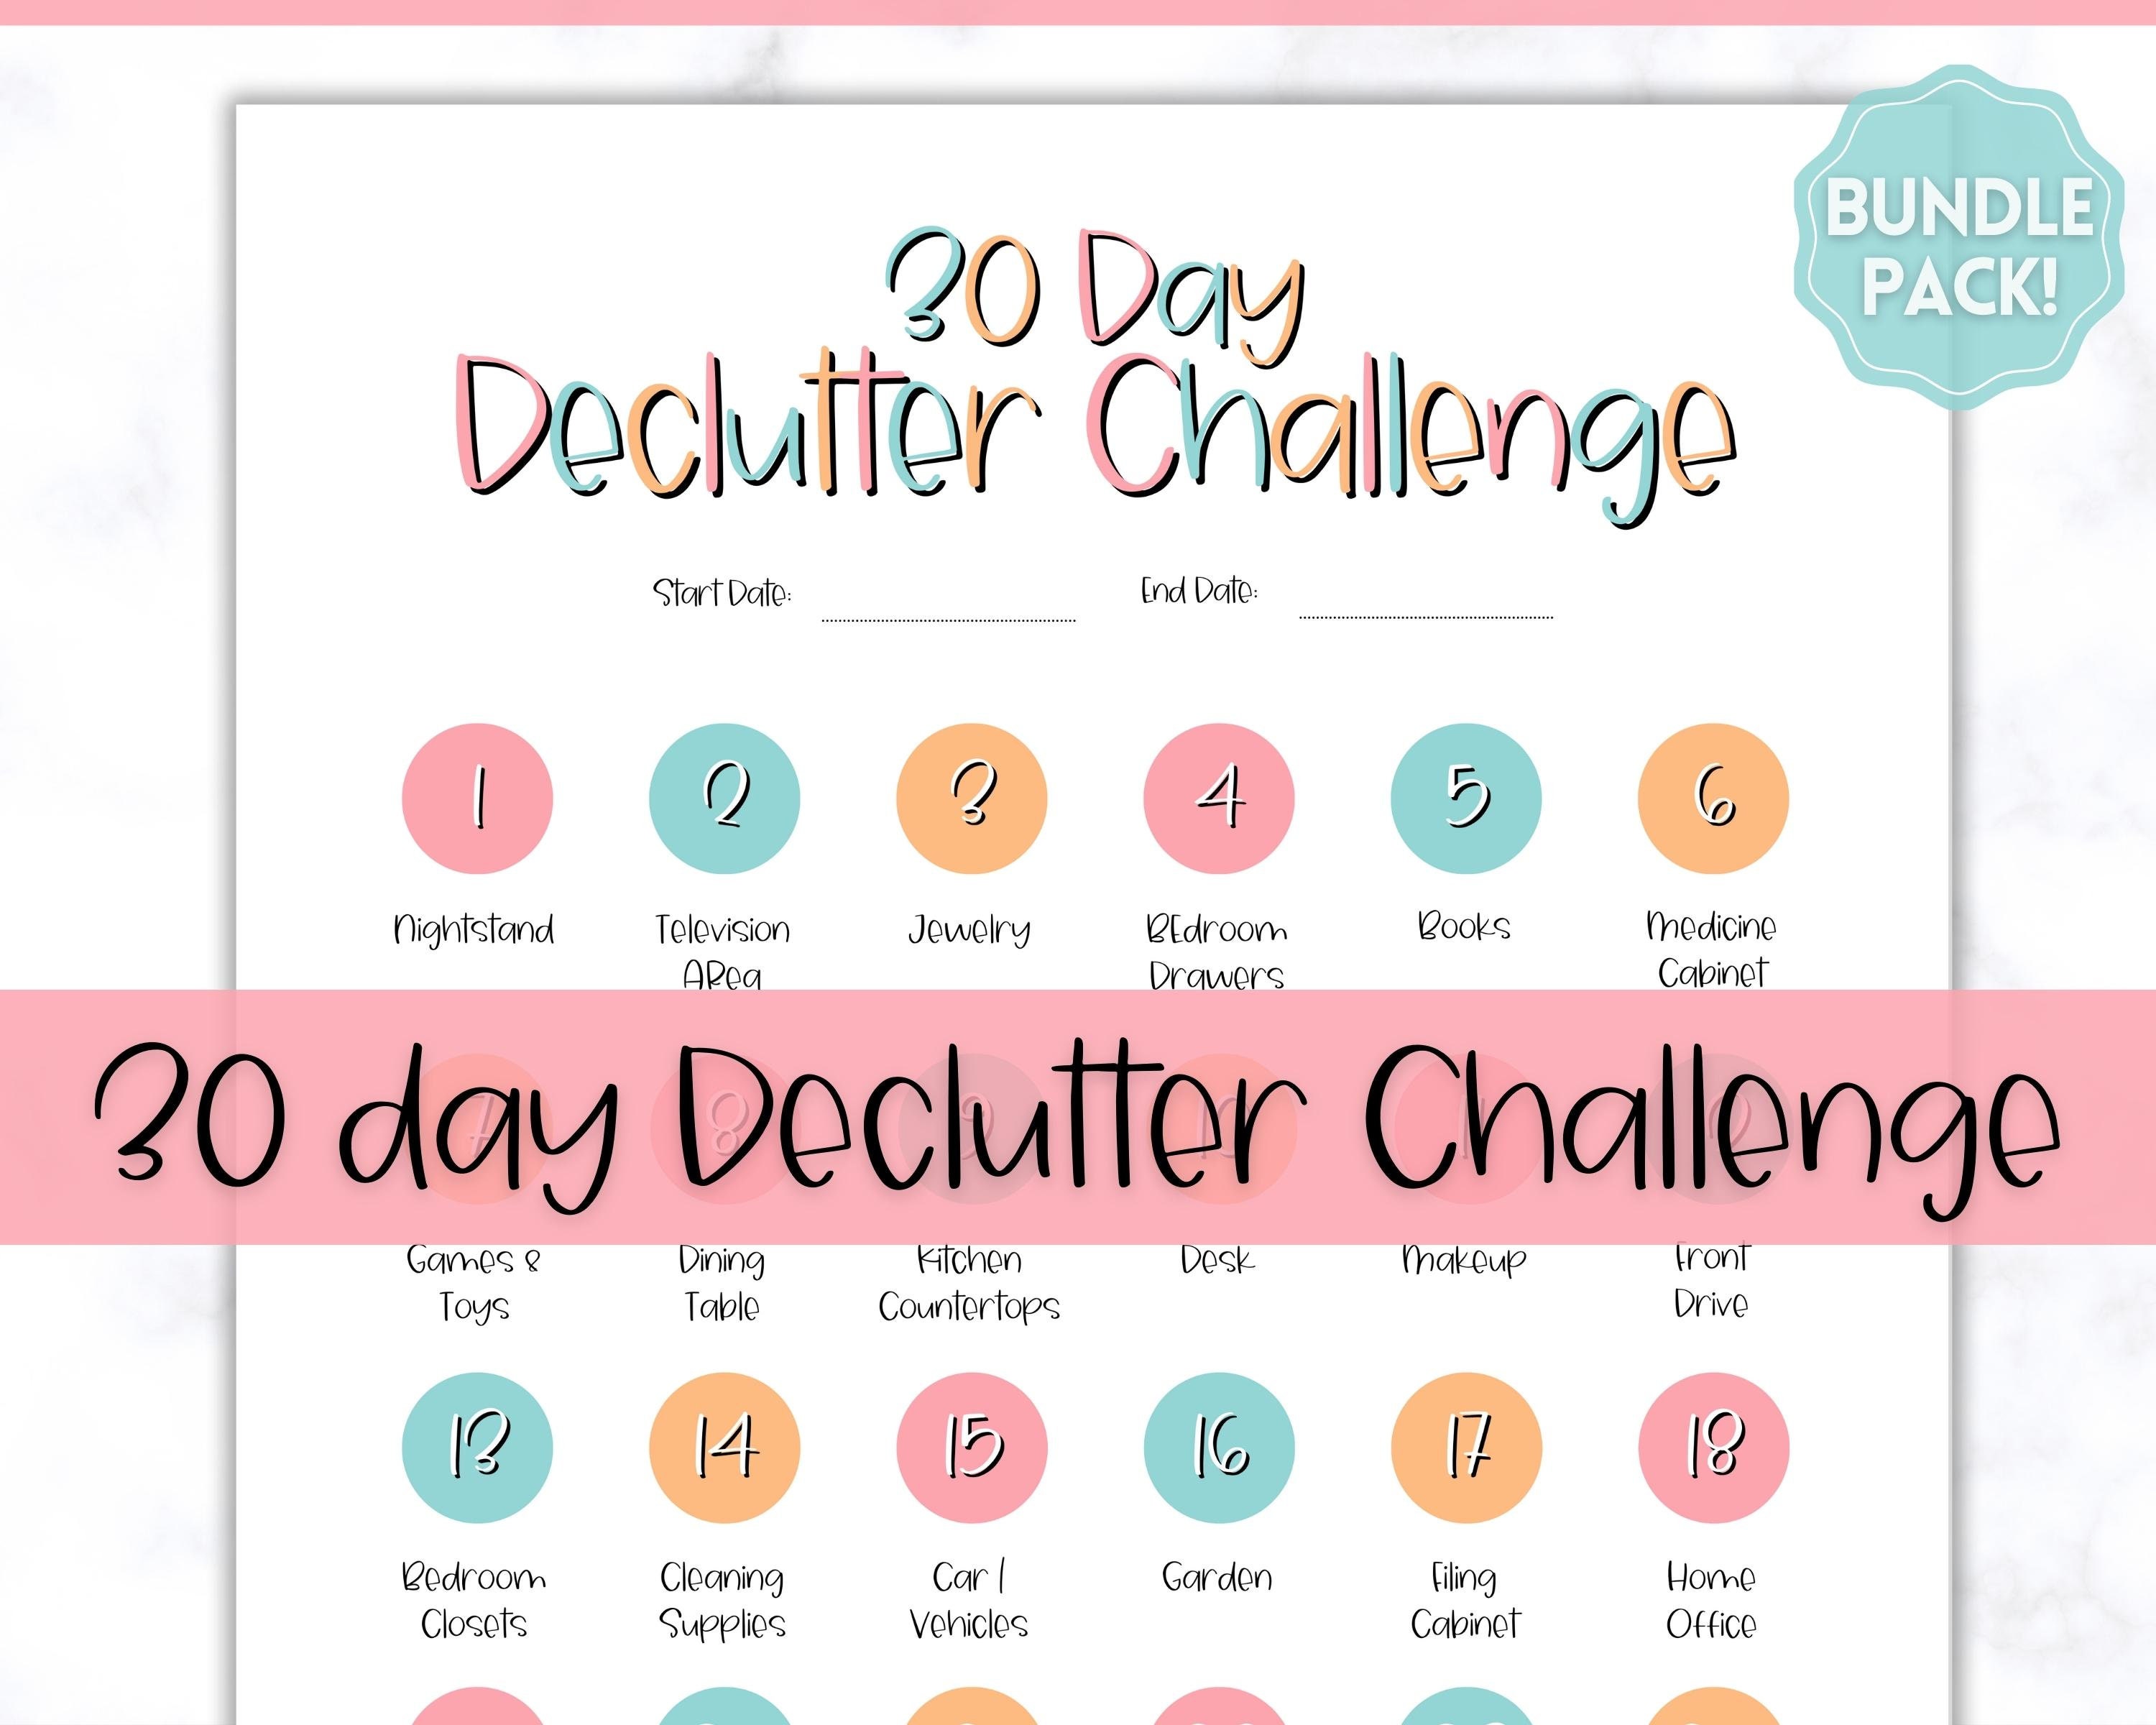 Beautiful Home Declutter and Clean Printable Bundle (90 Pages